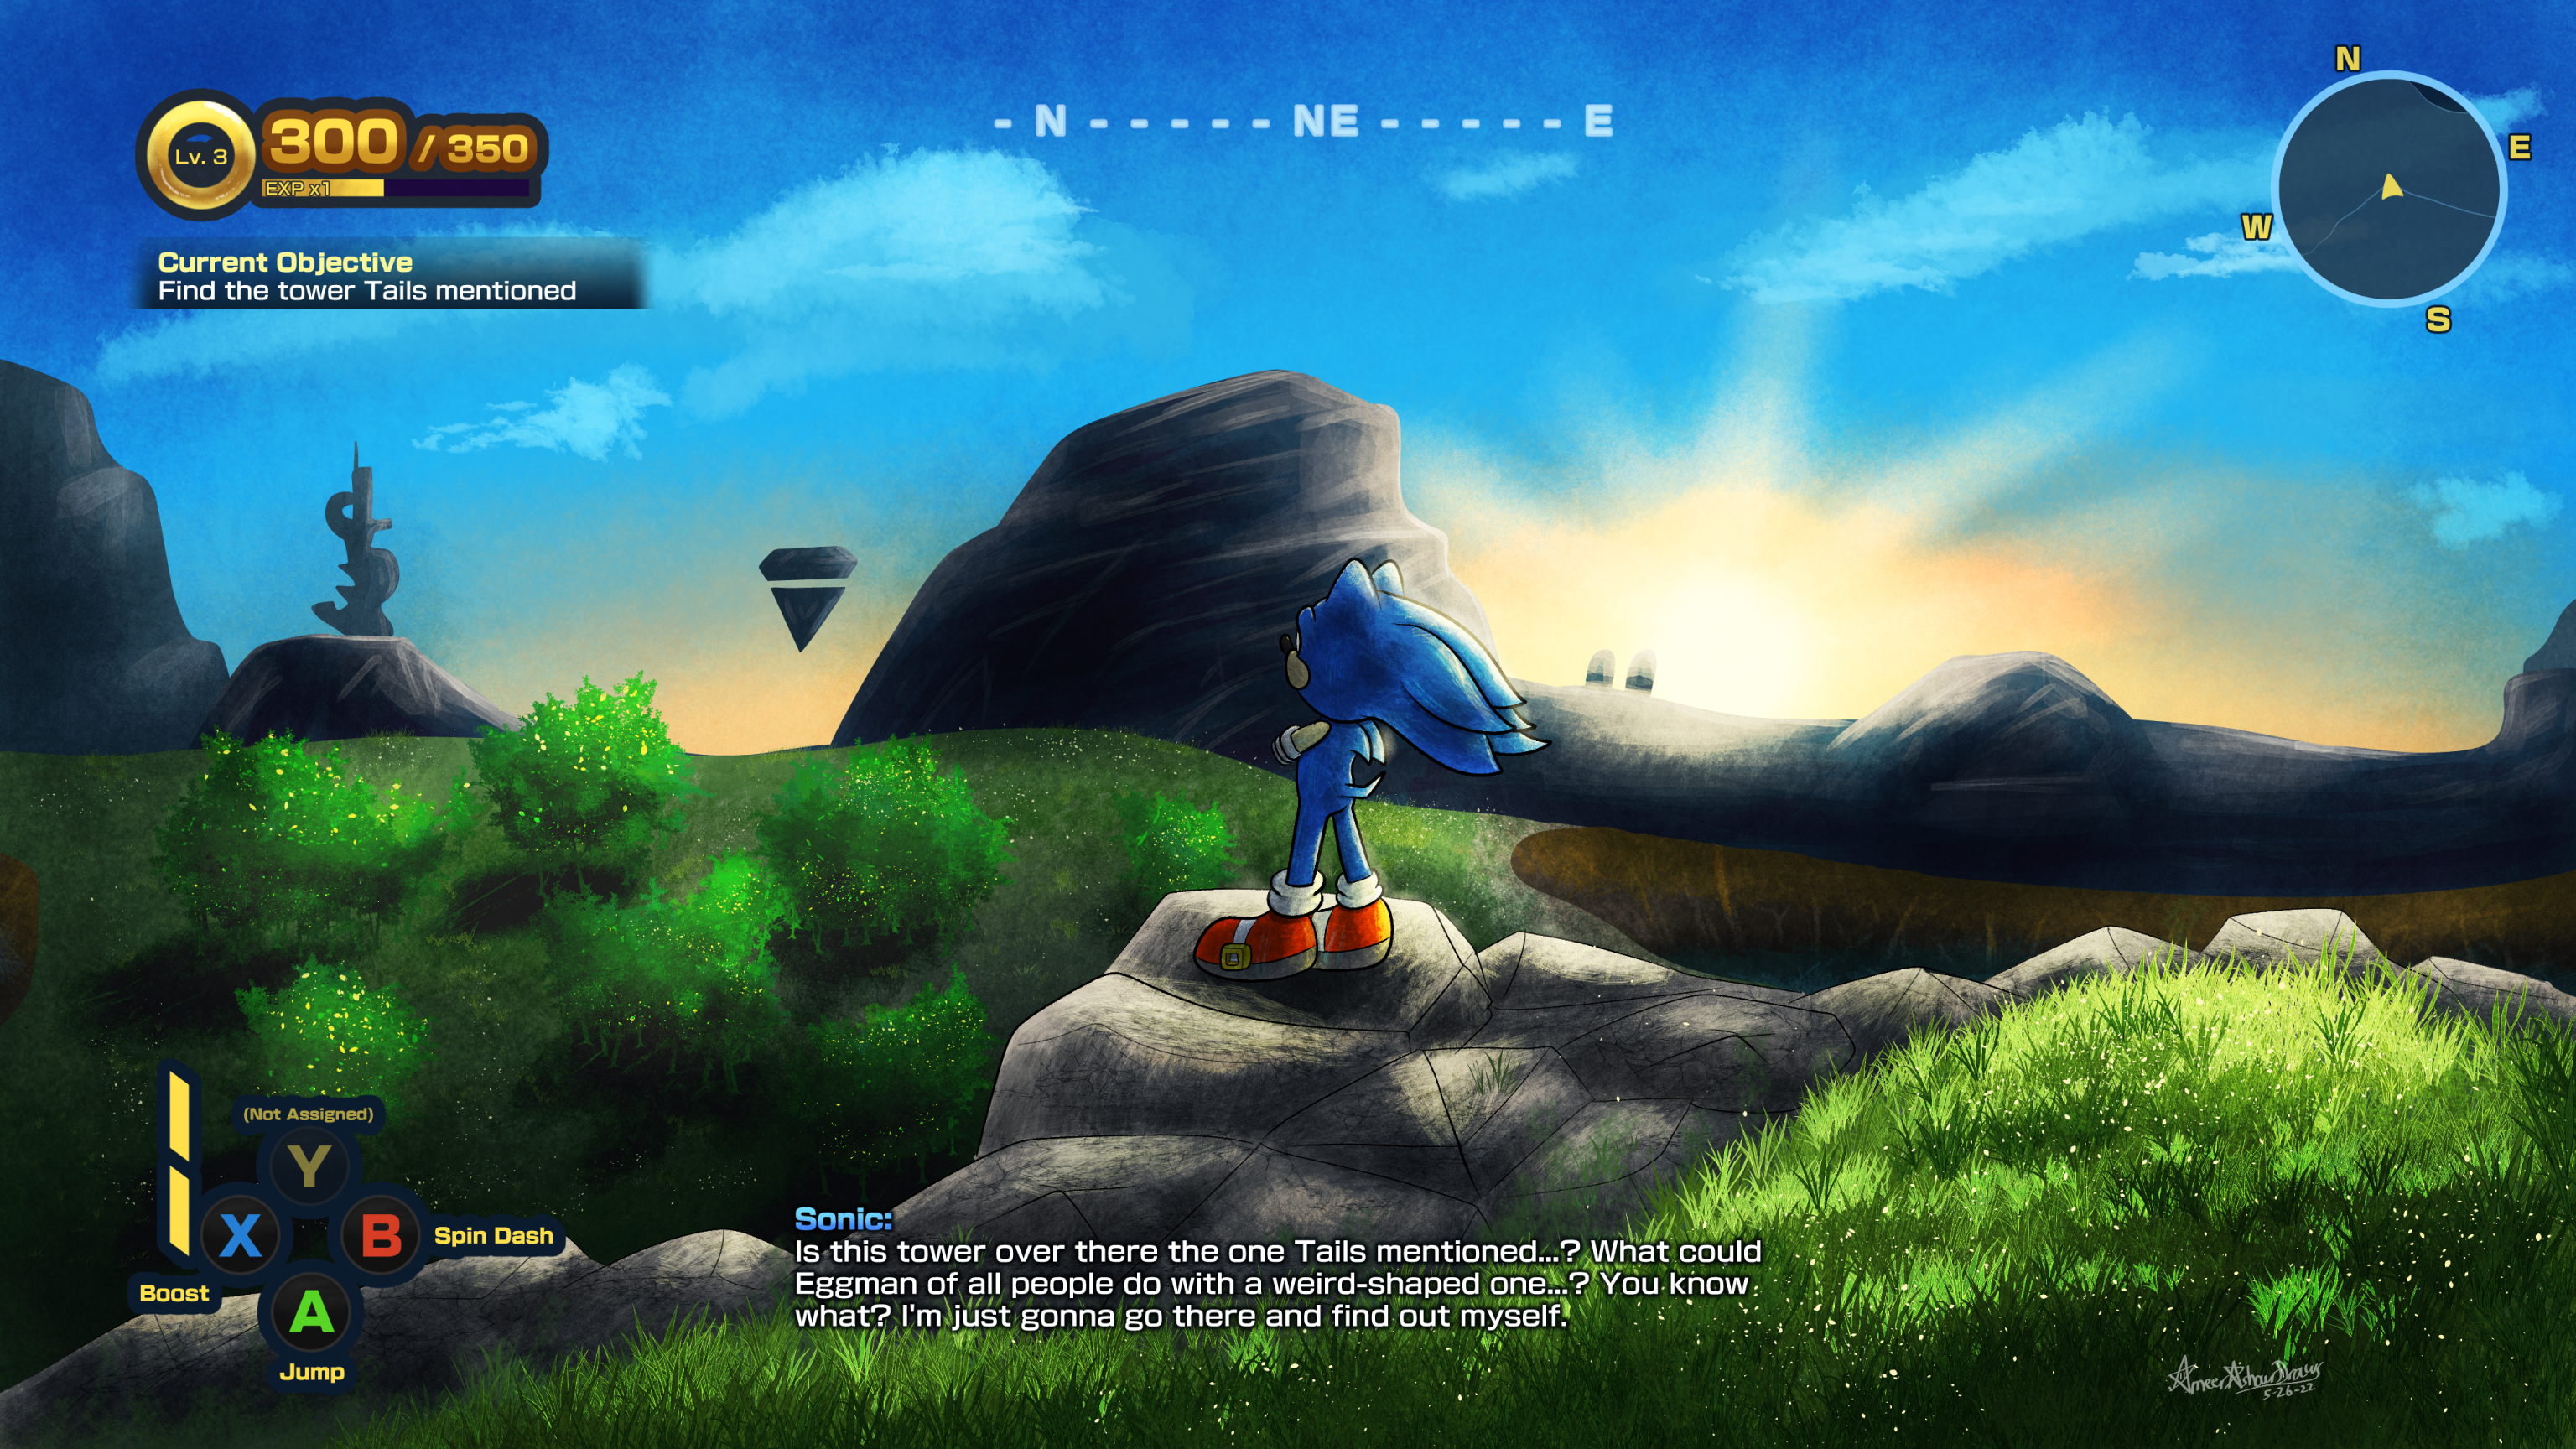 Daily Sonic Art (Over) on X: The End. (Sonic Frontiers, 2022